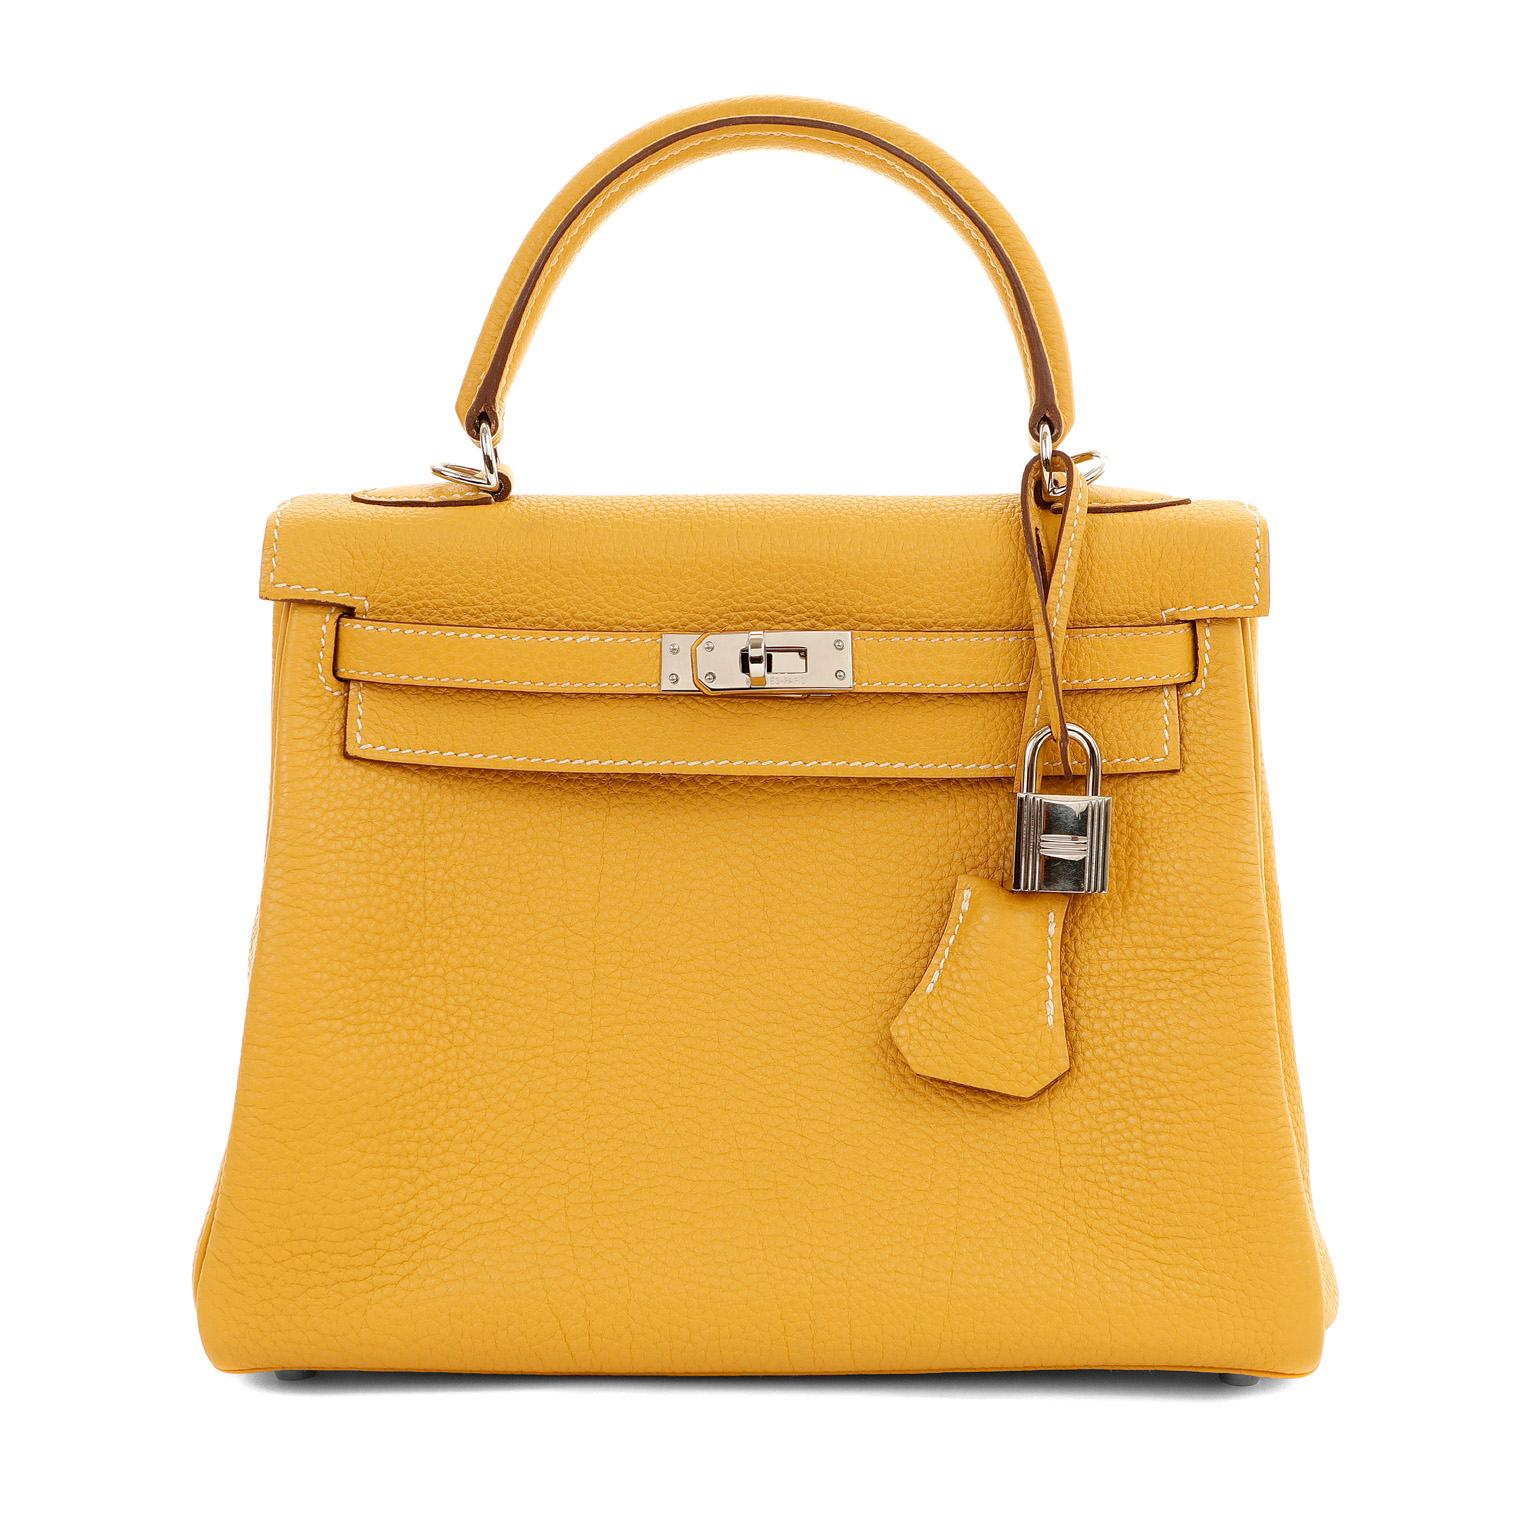 This authentic Hermès Mustard Yellow 25 cm Kelly is in pristine condition.  Hermès bags are considered the ultimate luxury item worldwide.  Each piece is handcrafted with waitlists that can exceed a year or more.  The ladylike Kelly is classic and